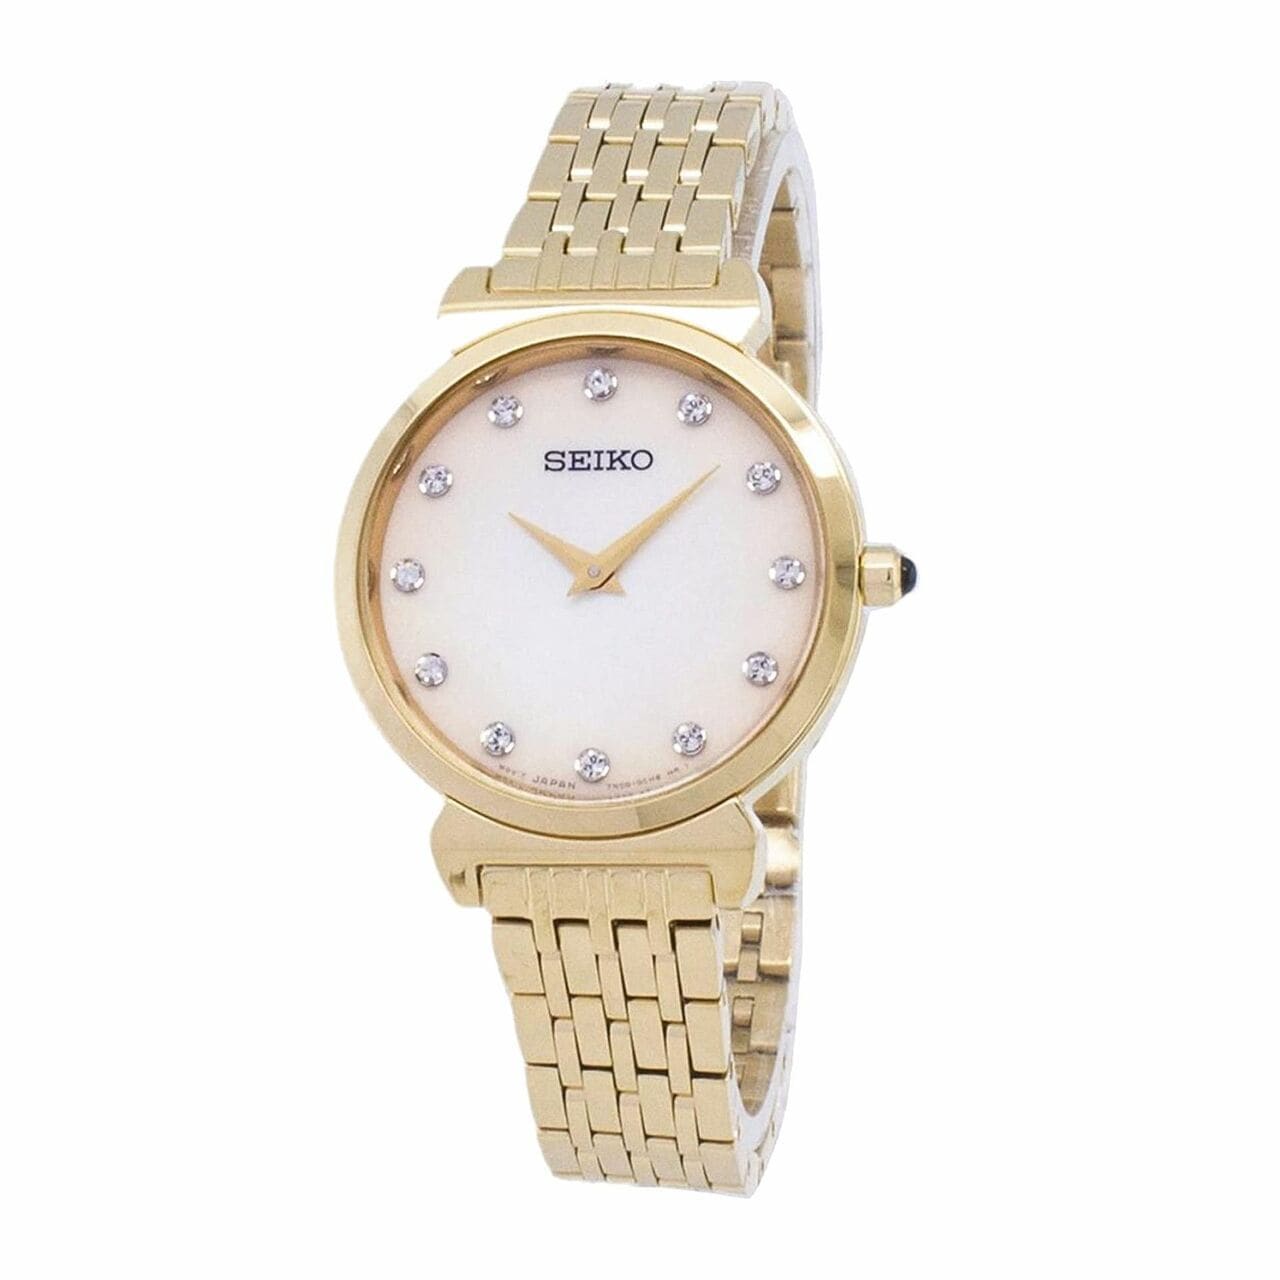 Seiko SFQ802 Gold Tone Mother of Pearl Dial Women's Diamond Accent Watch 029665196569